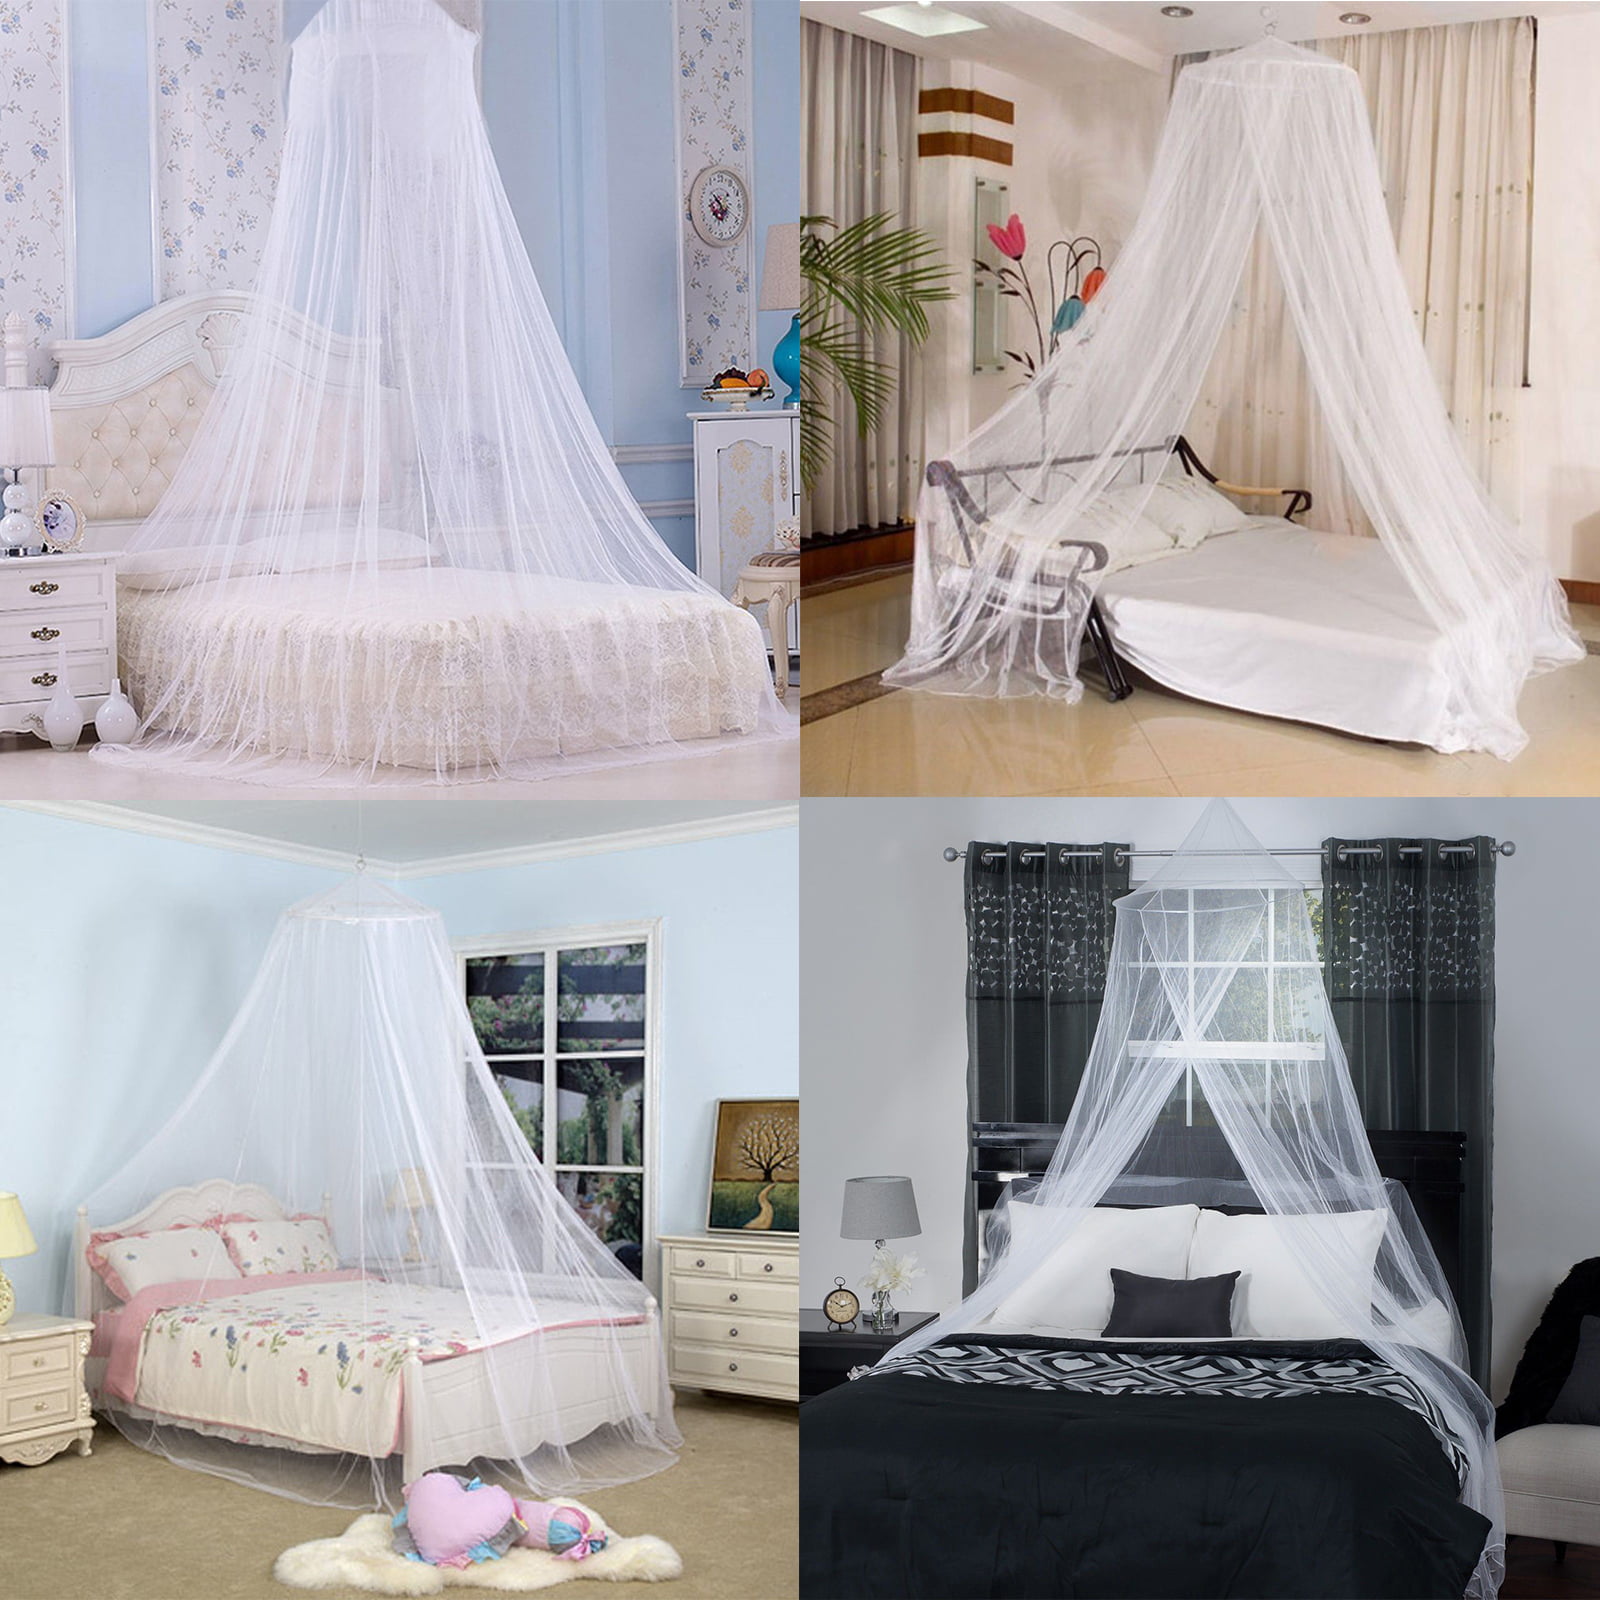 Baby Indoor Outdoor Play Reading Tent White Bed & Bedroom Decoration Princess Bed Canopy Insect Net Protection Mosqutio Net Hanging Curtain-Beautiful Childrens Bed Canopy in White